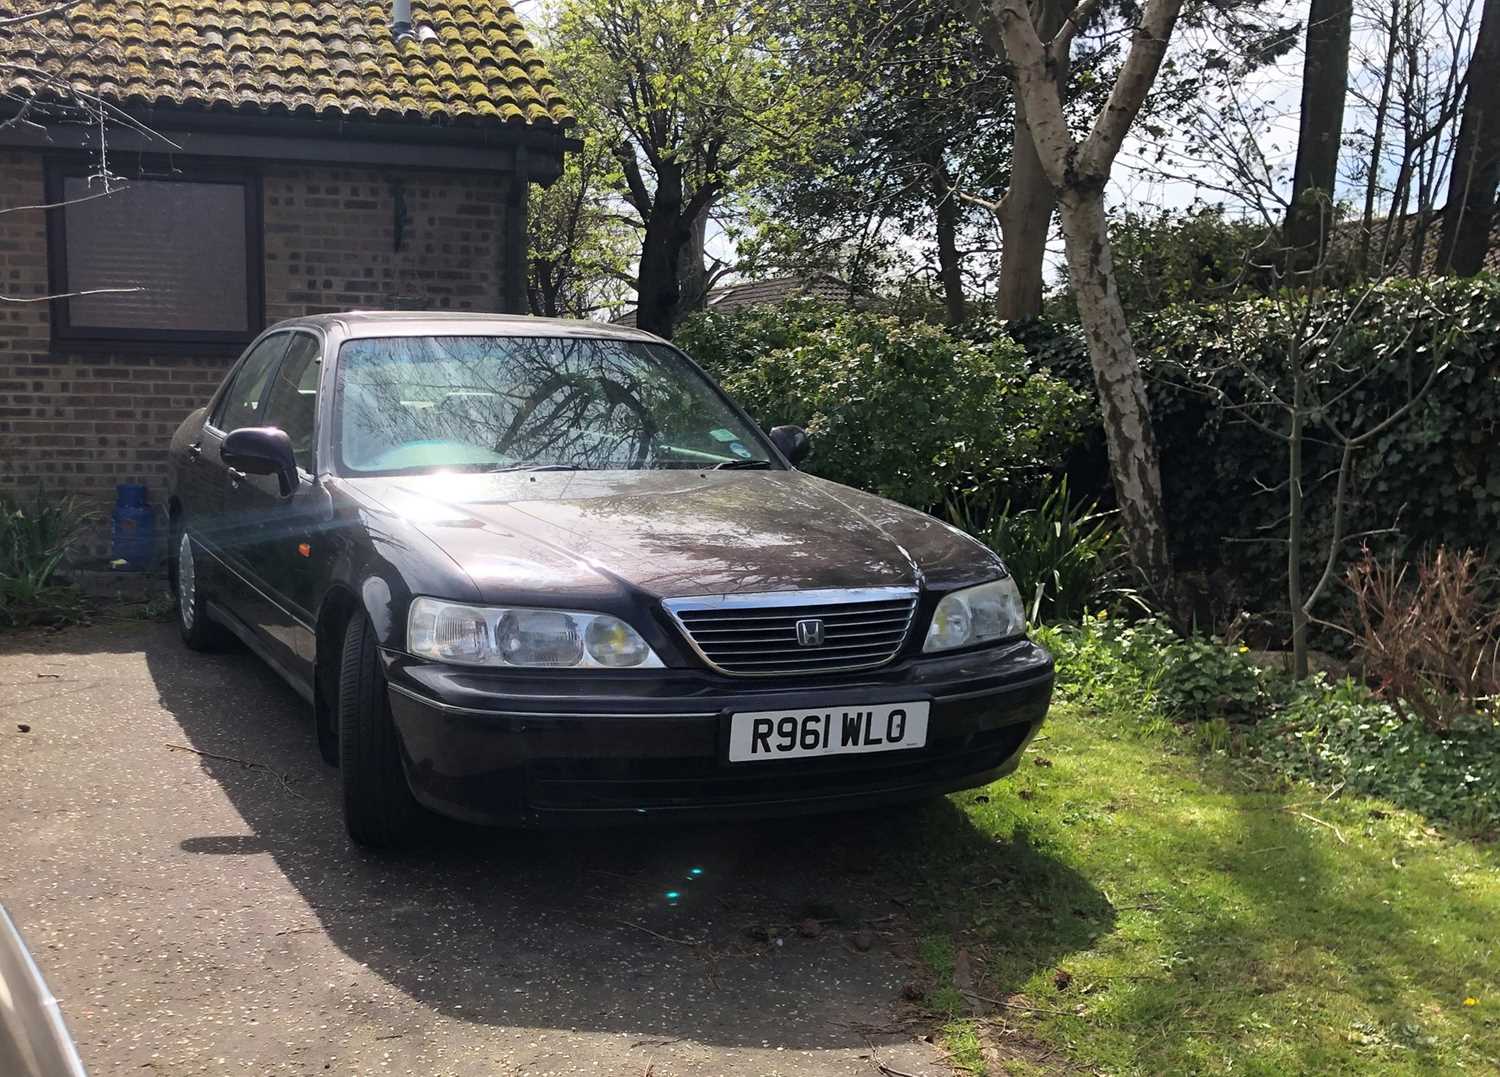 Lot 19 - 1998 Honda Legend 3.5 V6, Saloon, Automatic, finished in purple with grey leather interior